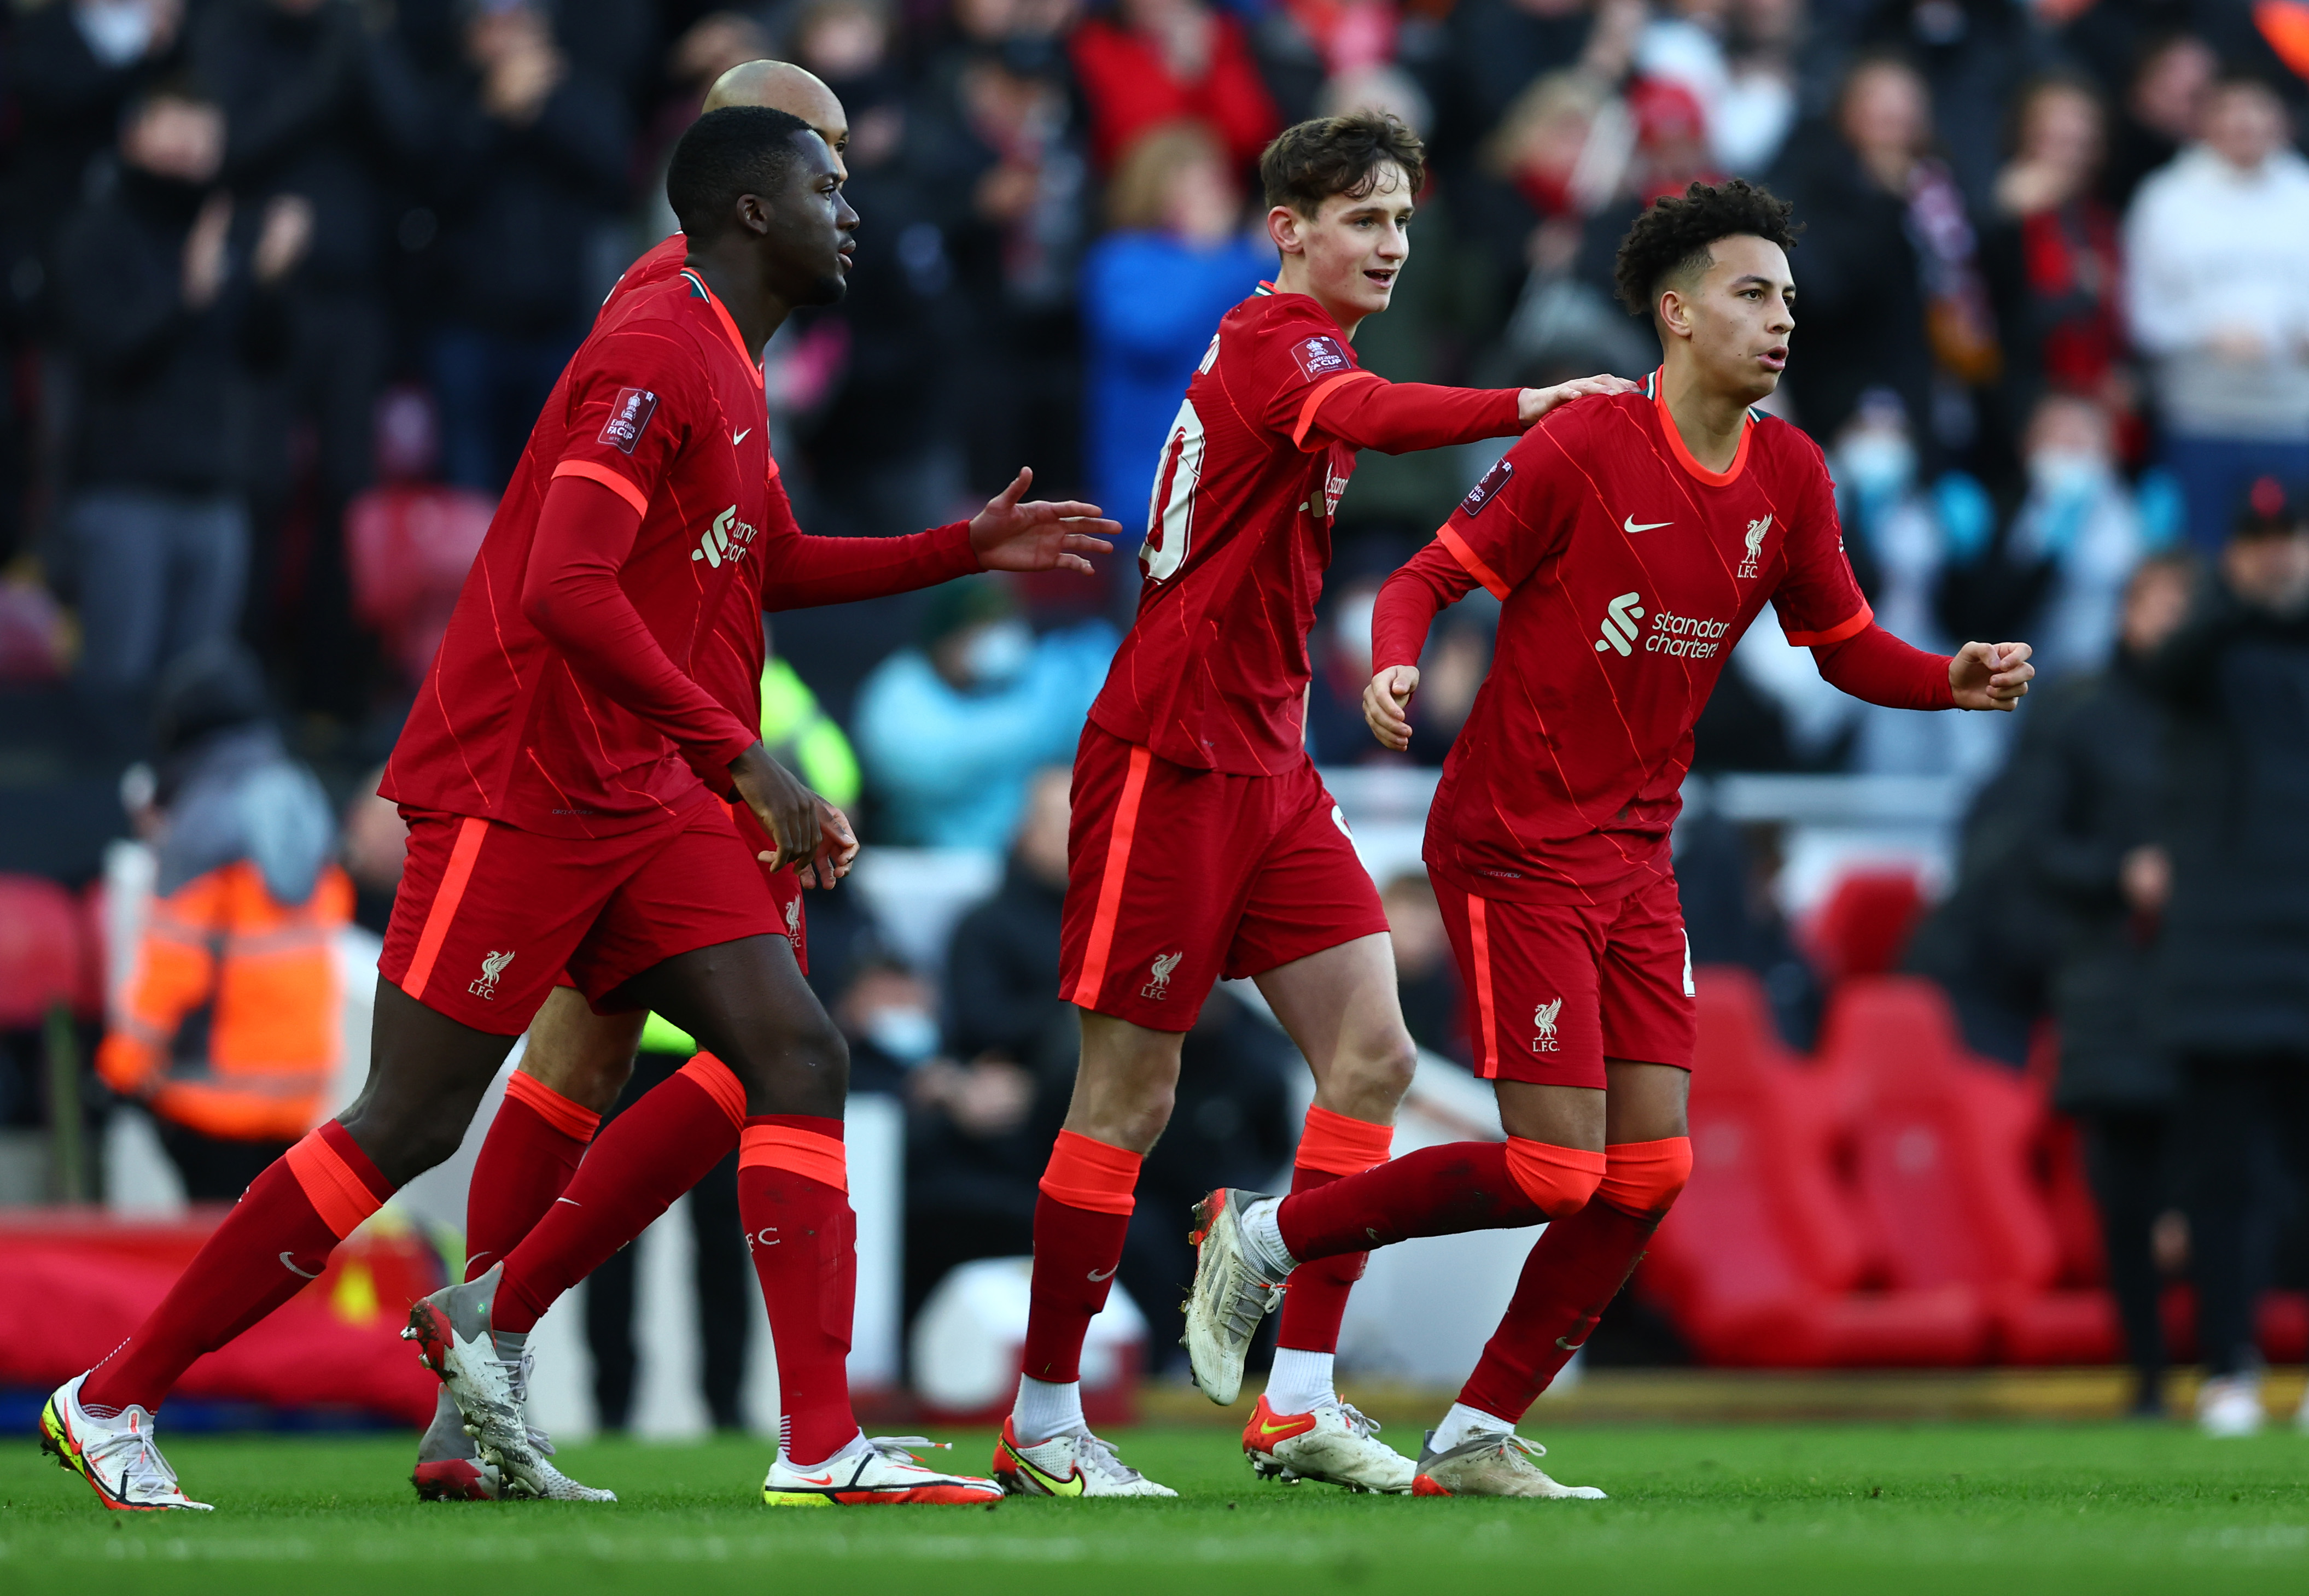 ‘Another player like Harvey Elliott’ – Paul Robinson provides his verdict on one Liverpool youngster that impressed against Shrewsbury